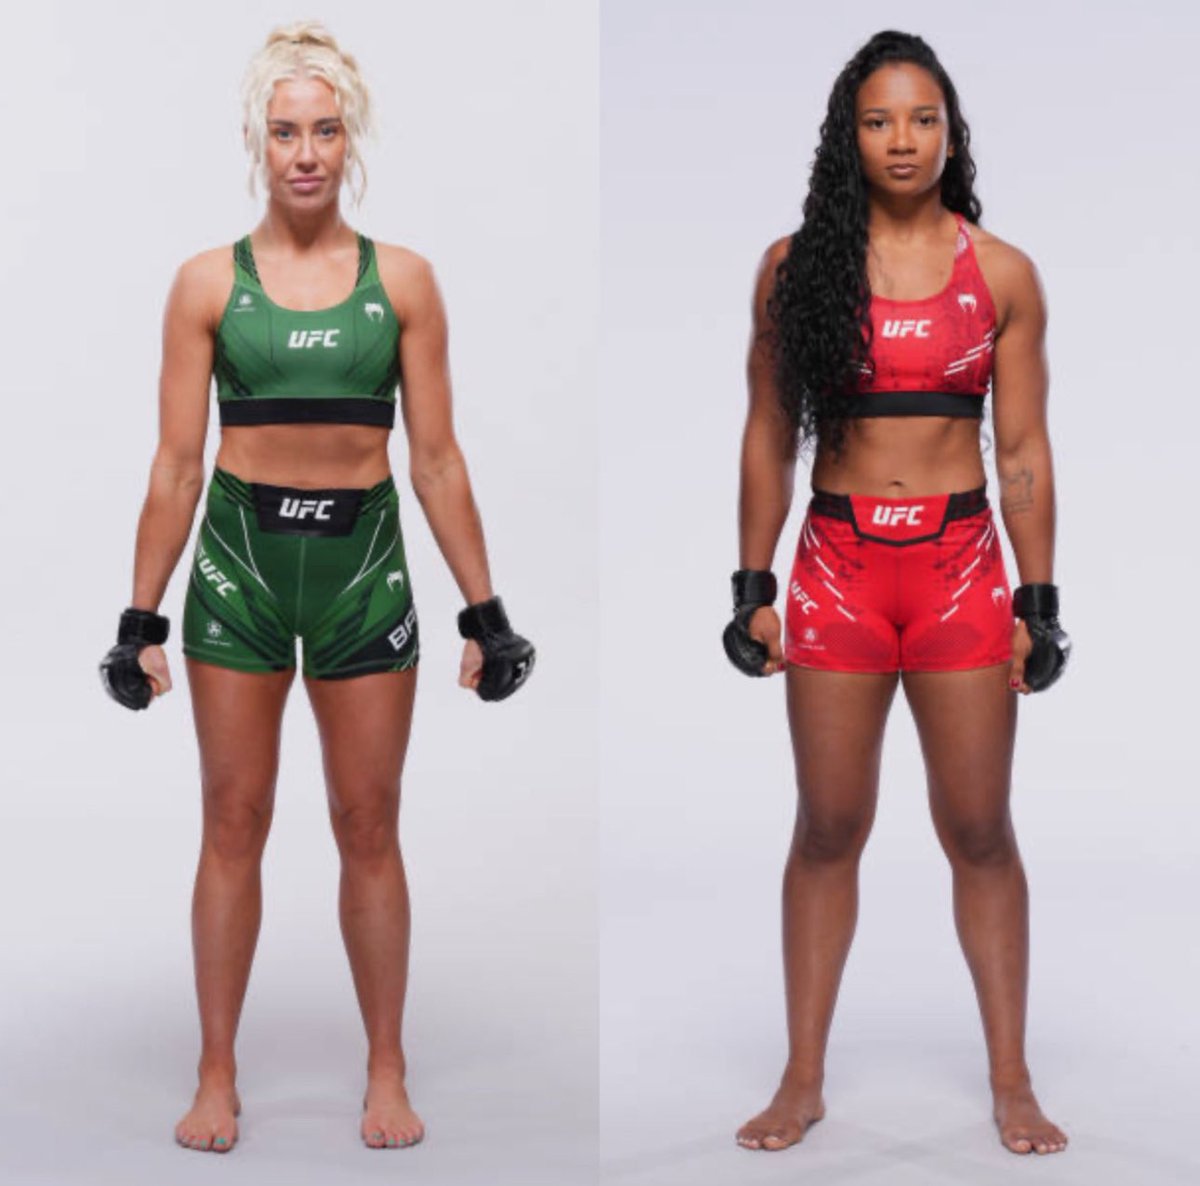 Shauna Bannon will look to bounce back from her defeat to Bruna Brazil when she takes on Ravena Oliveira on July 27th.
(Reported by @BigMarcel24) #UFC304 #MMATwitter